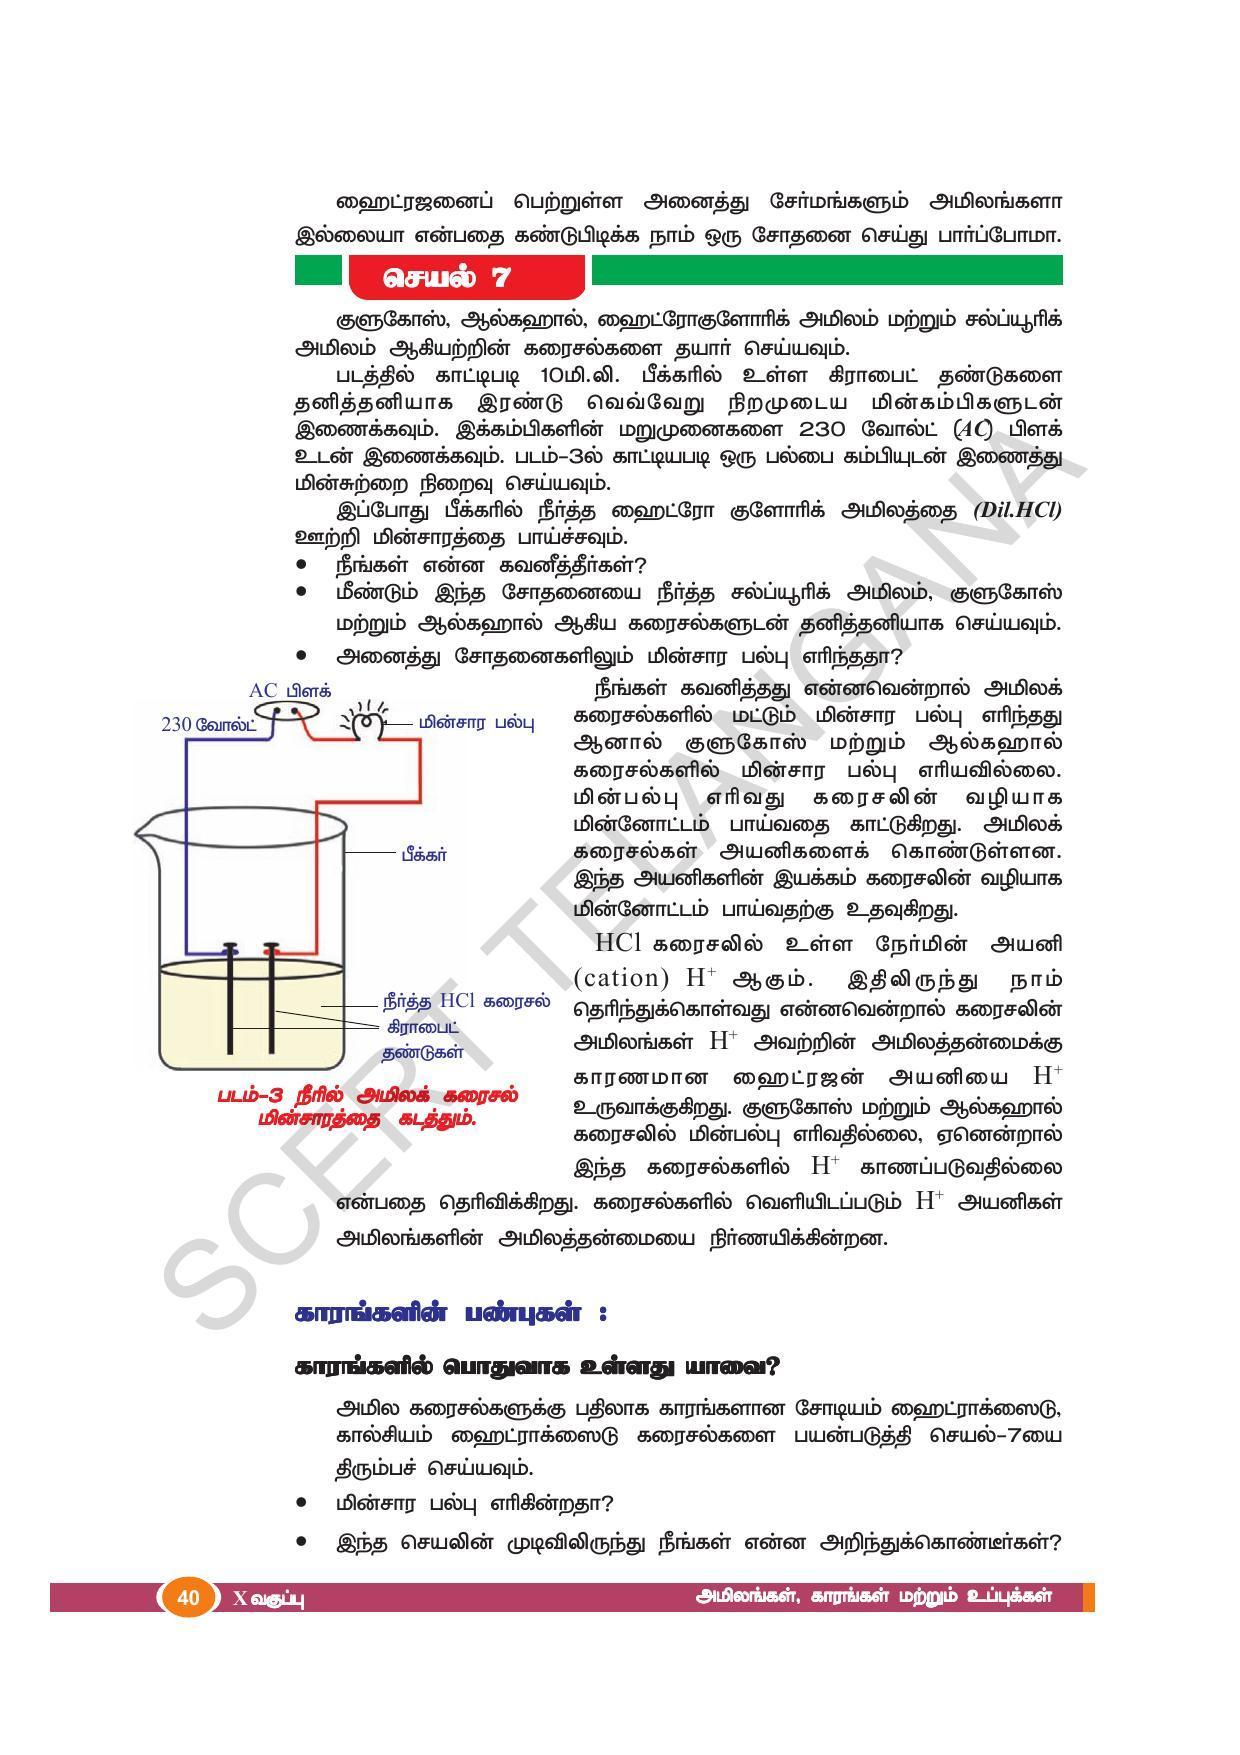 TS SCERT Class 10 Physical Science(Tamil Medium) Text Book - Page 52